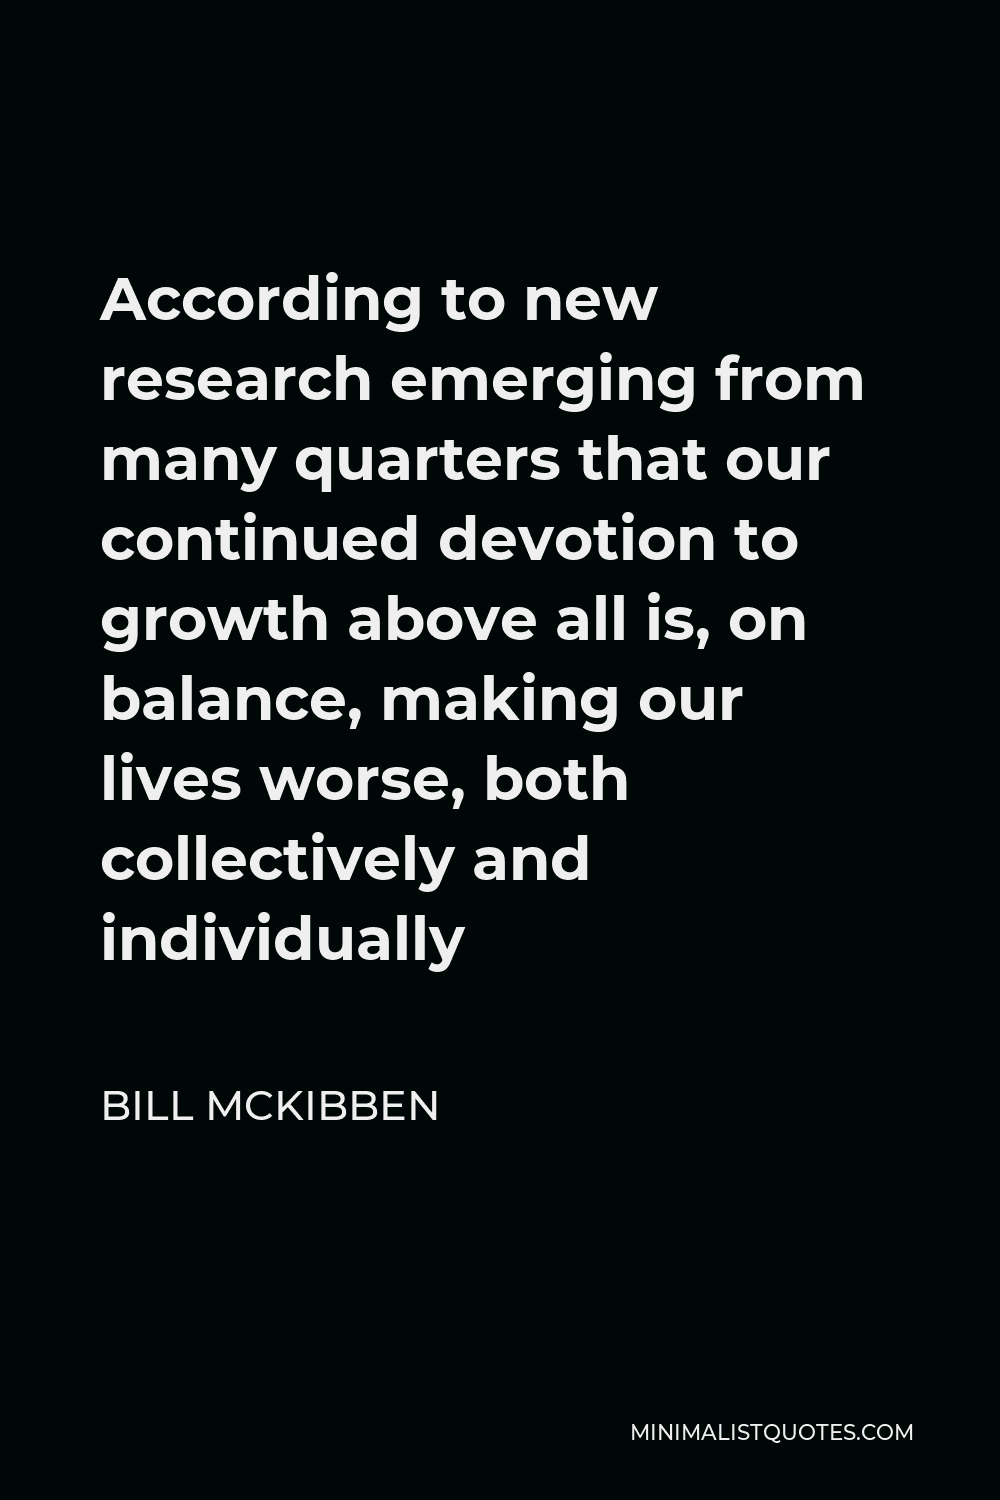 Bill McKibben Quote - According to new research emerging from many quarters that our continued devotion to growth above all is, on balance, making our lives worse, both collectively and individually